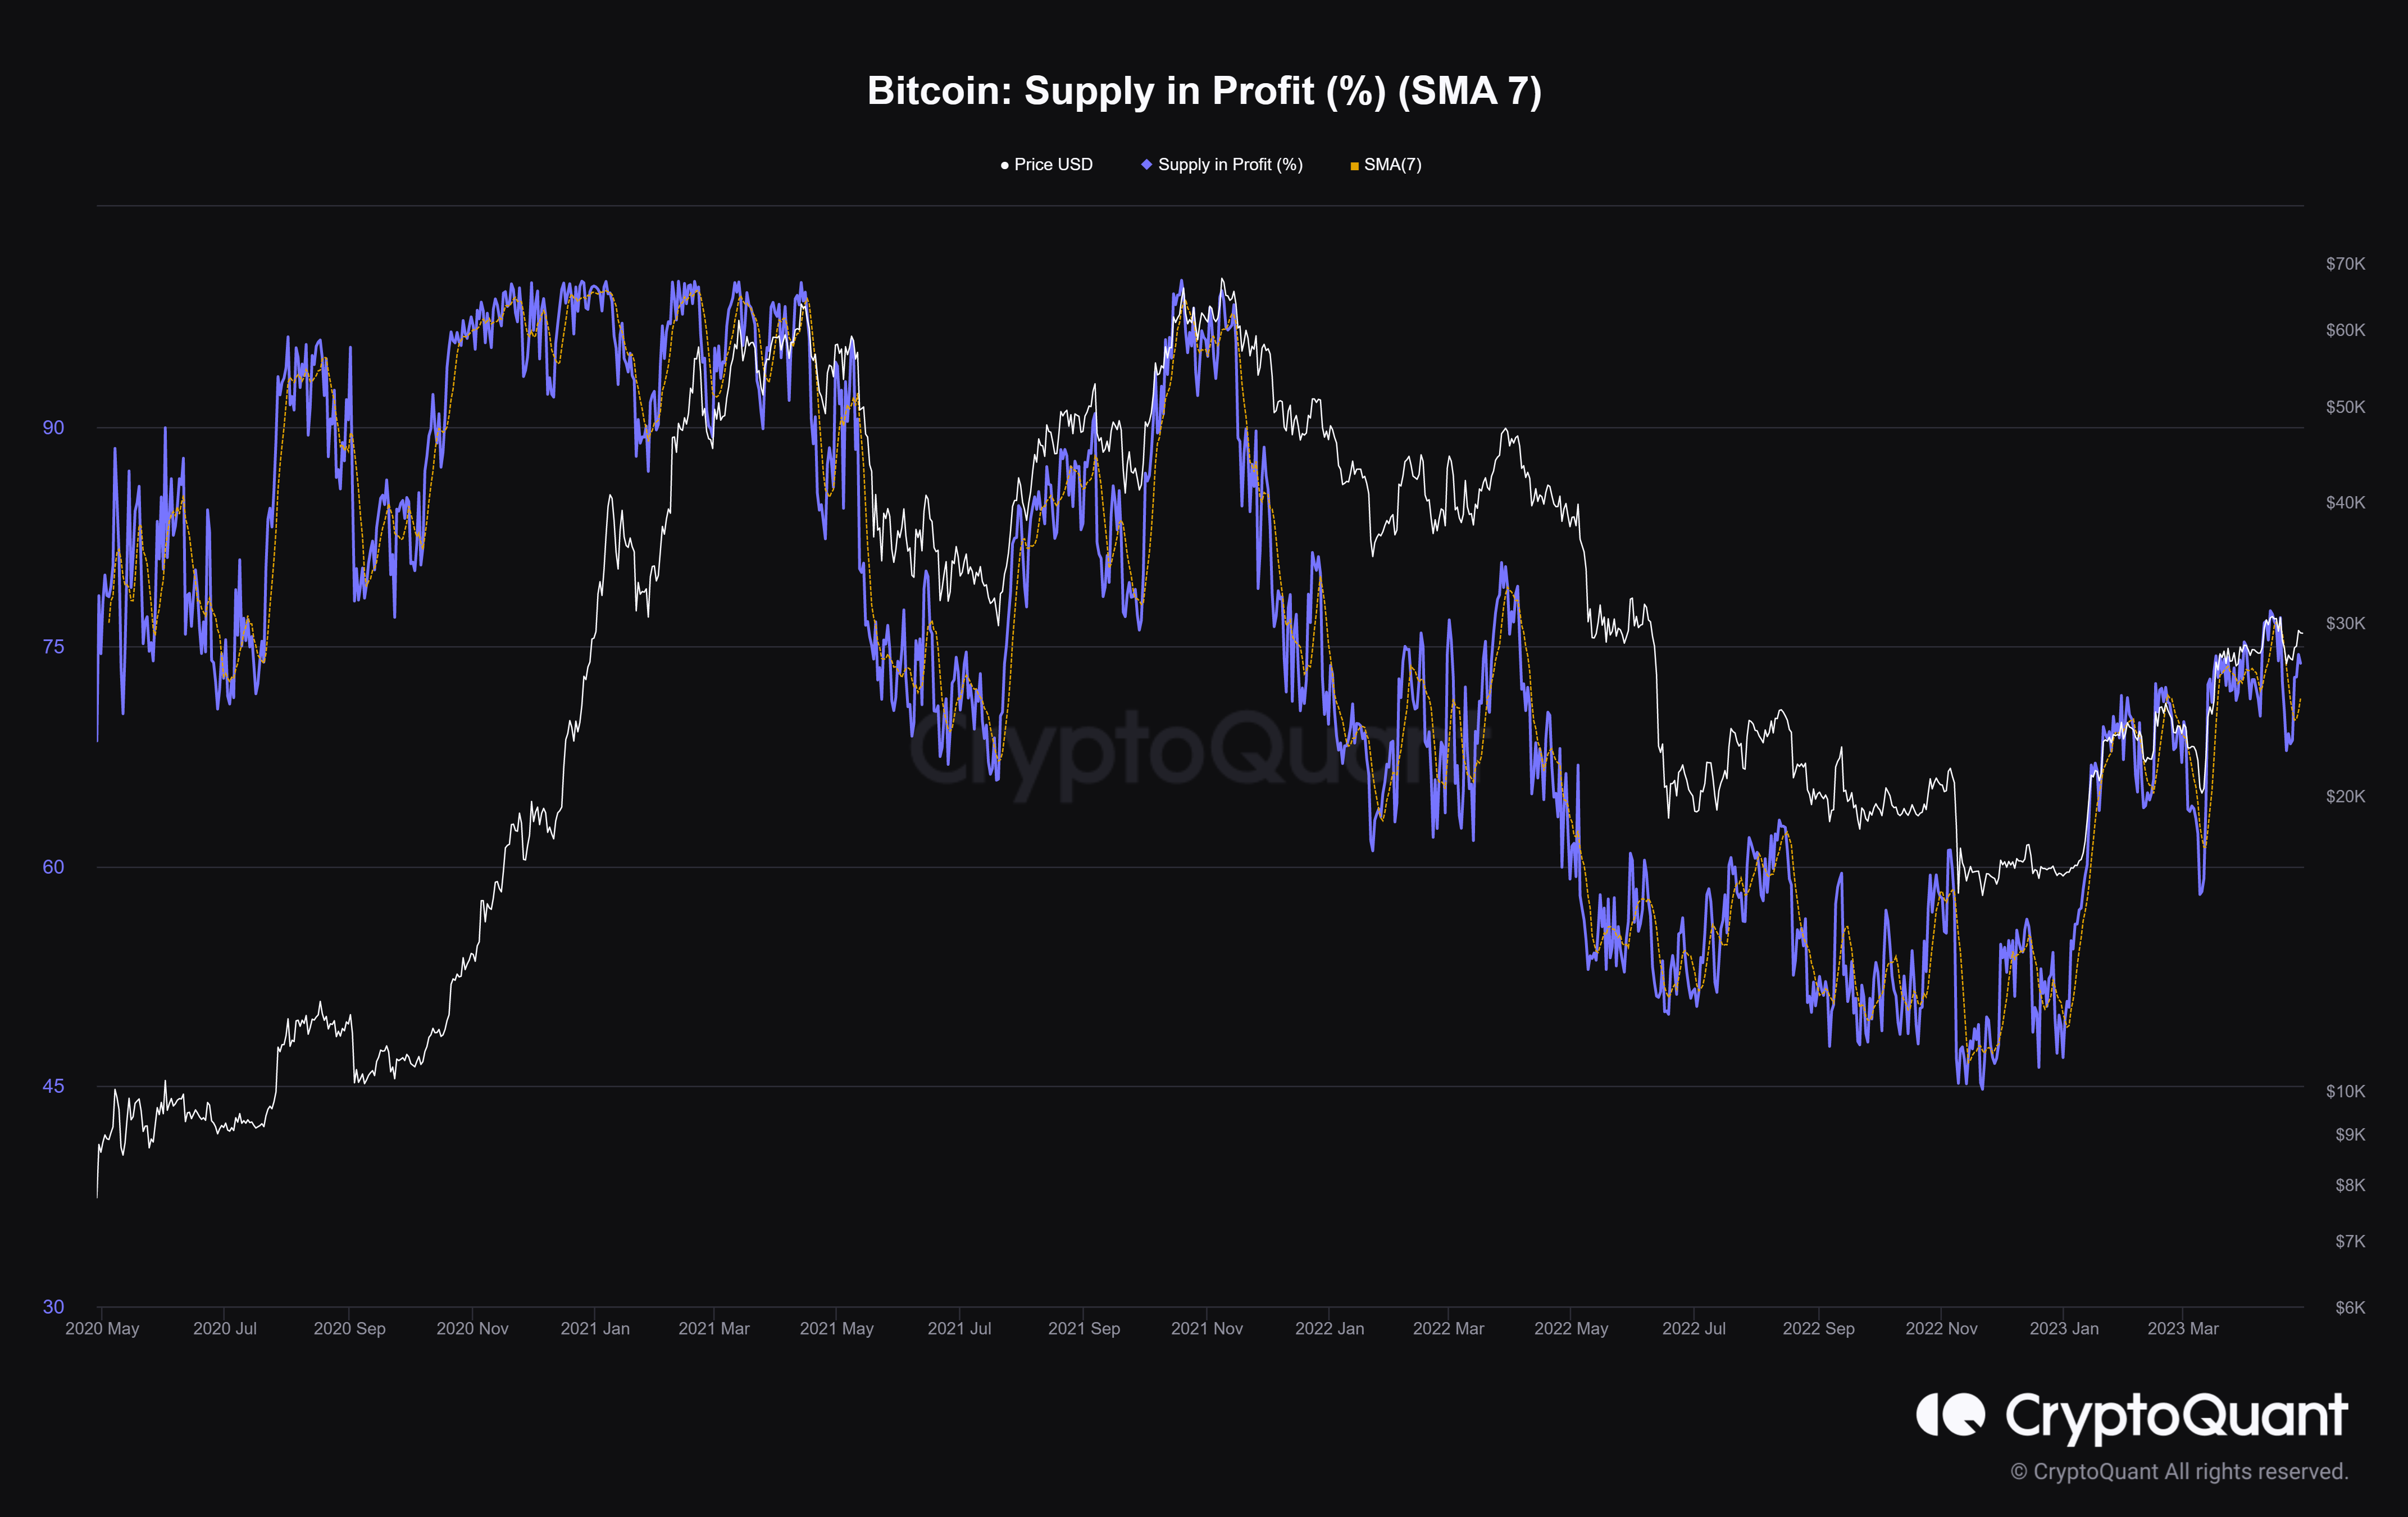 Bitcoin supply in profit